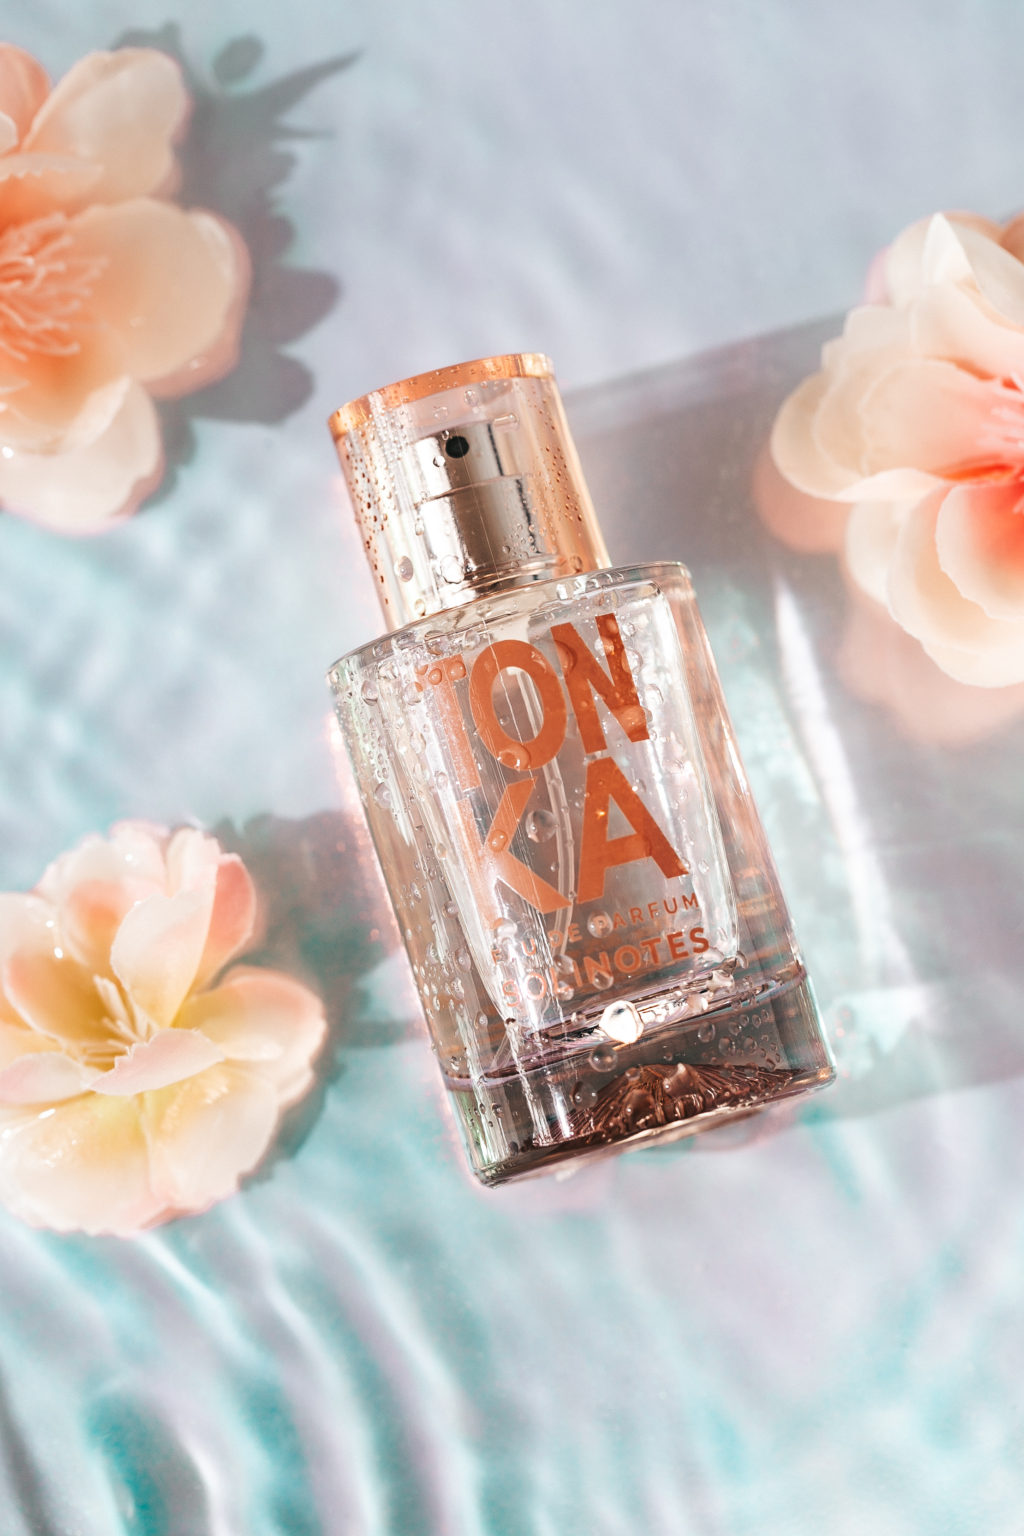 Image of Tonka perfume. Flowers are in the background and the bottle sits in shallow water